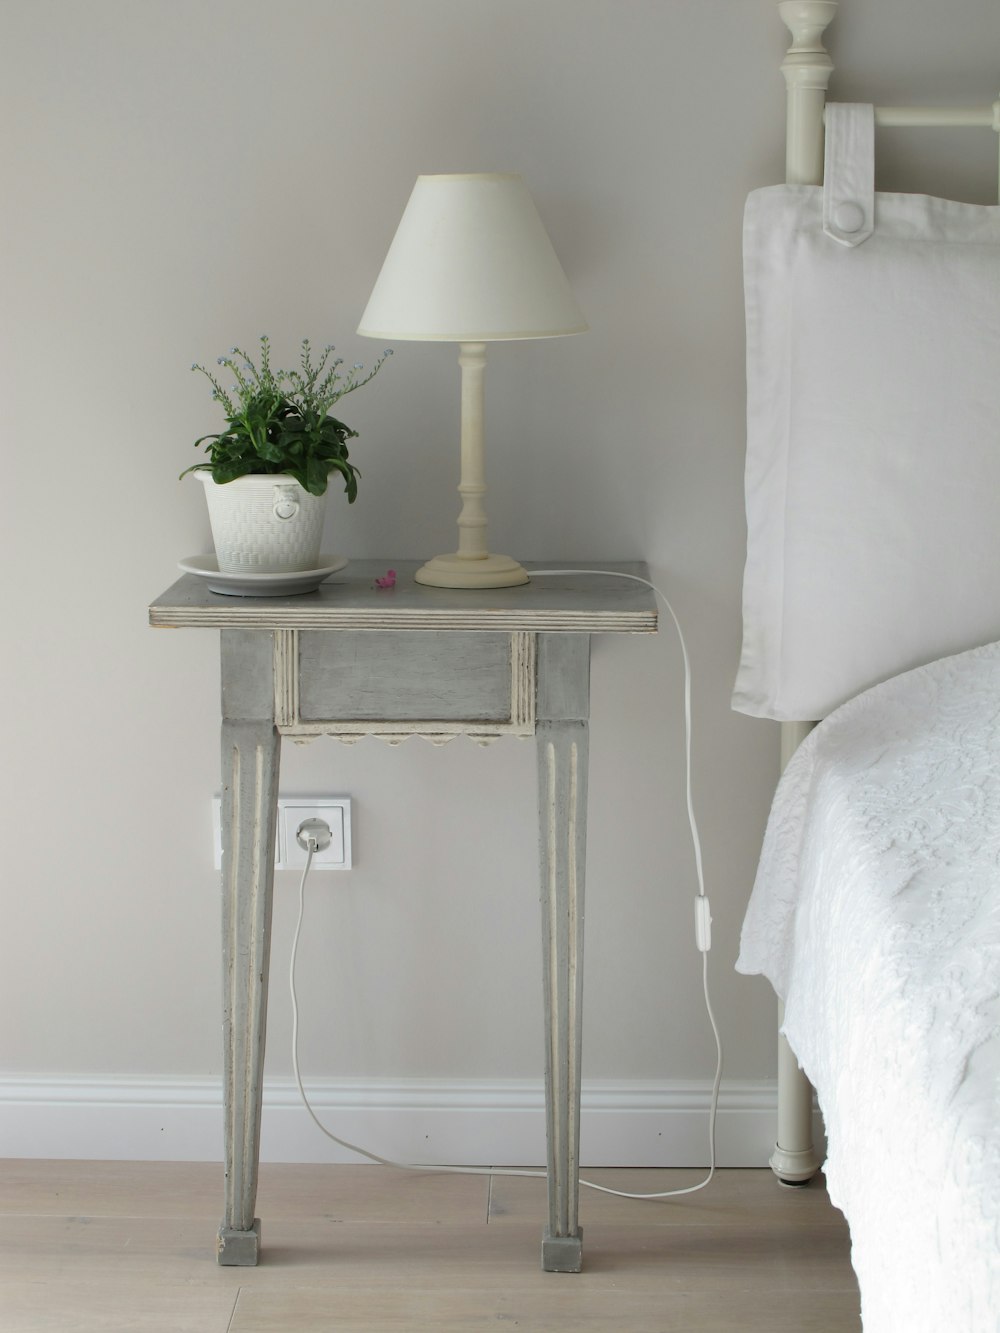 white table lamp on gray end table